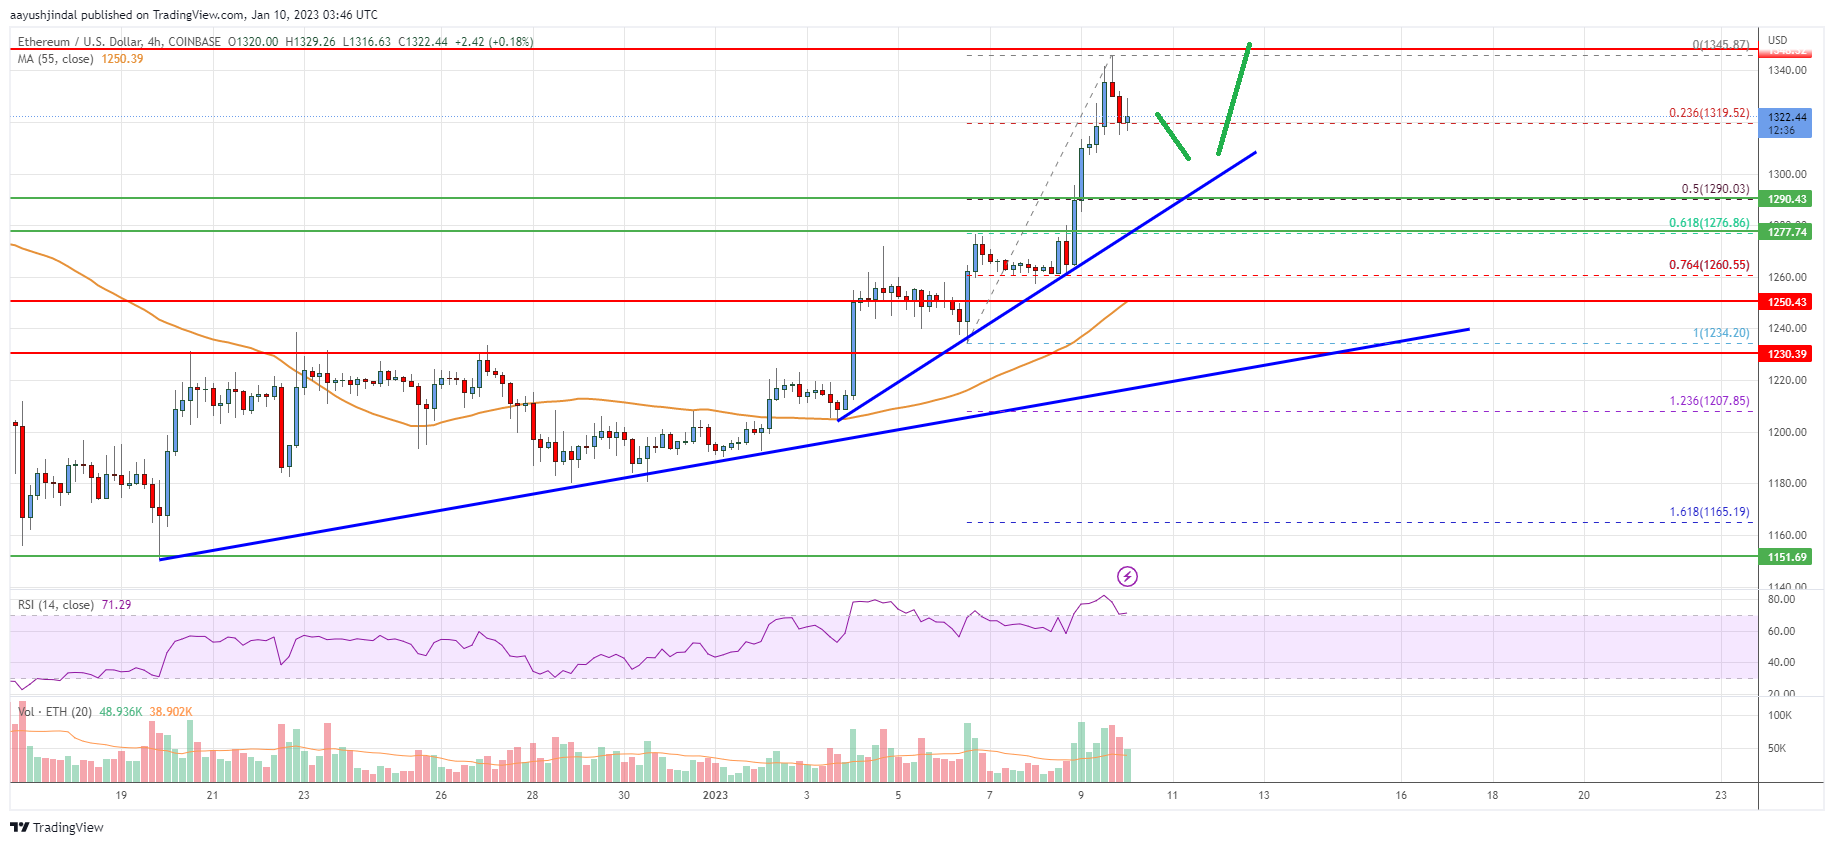 Ethereum Price Analysis: Upside Break Could Trigger More Gains